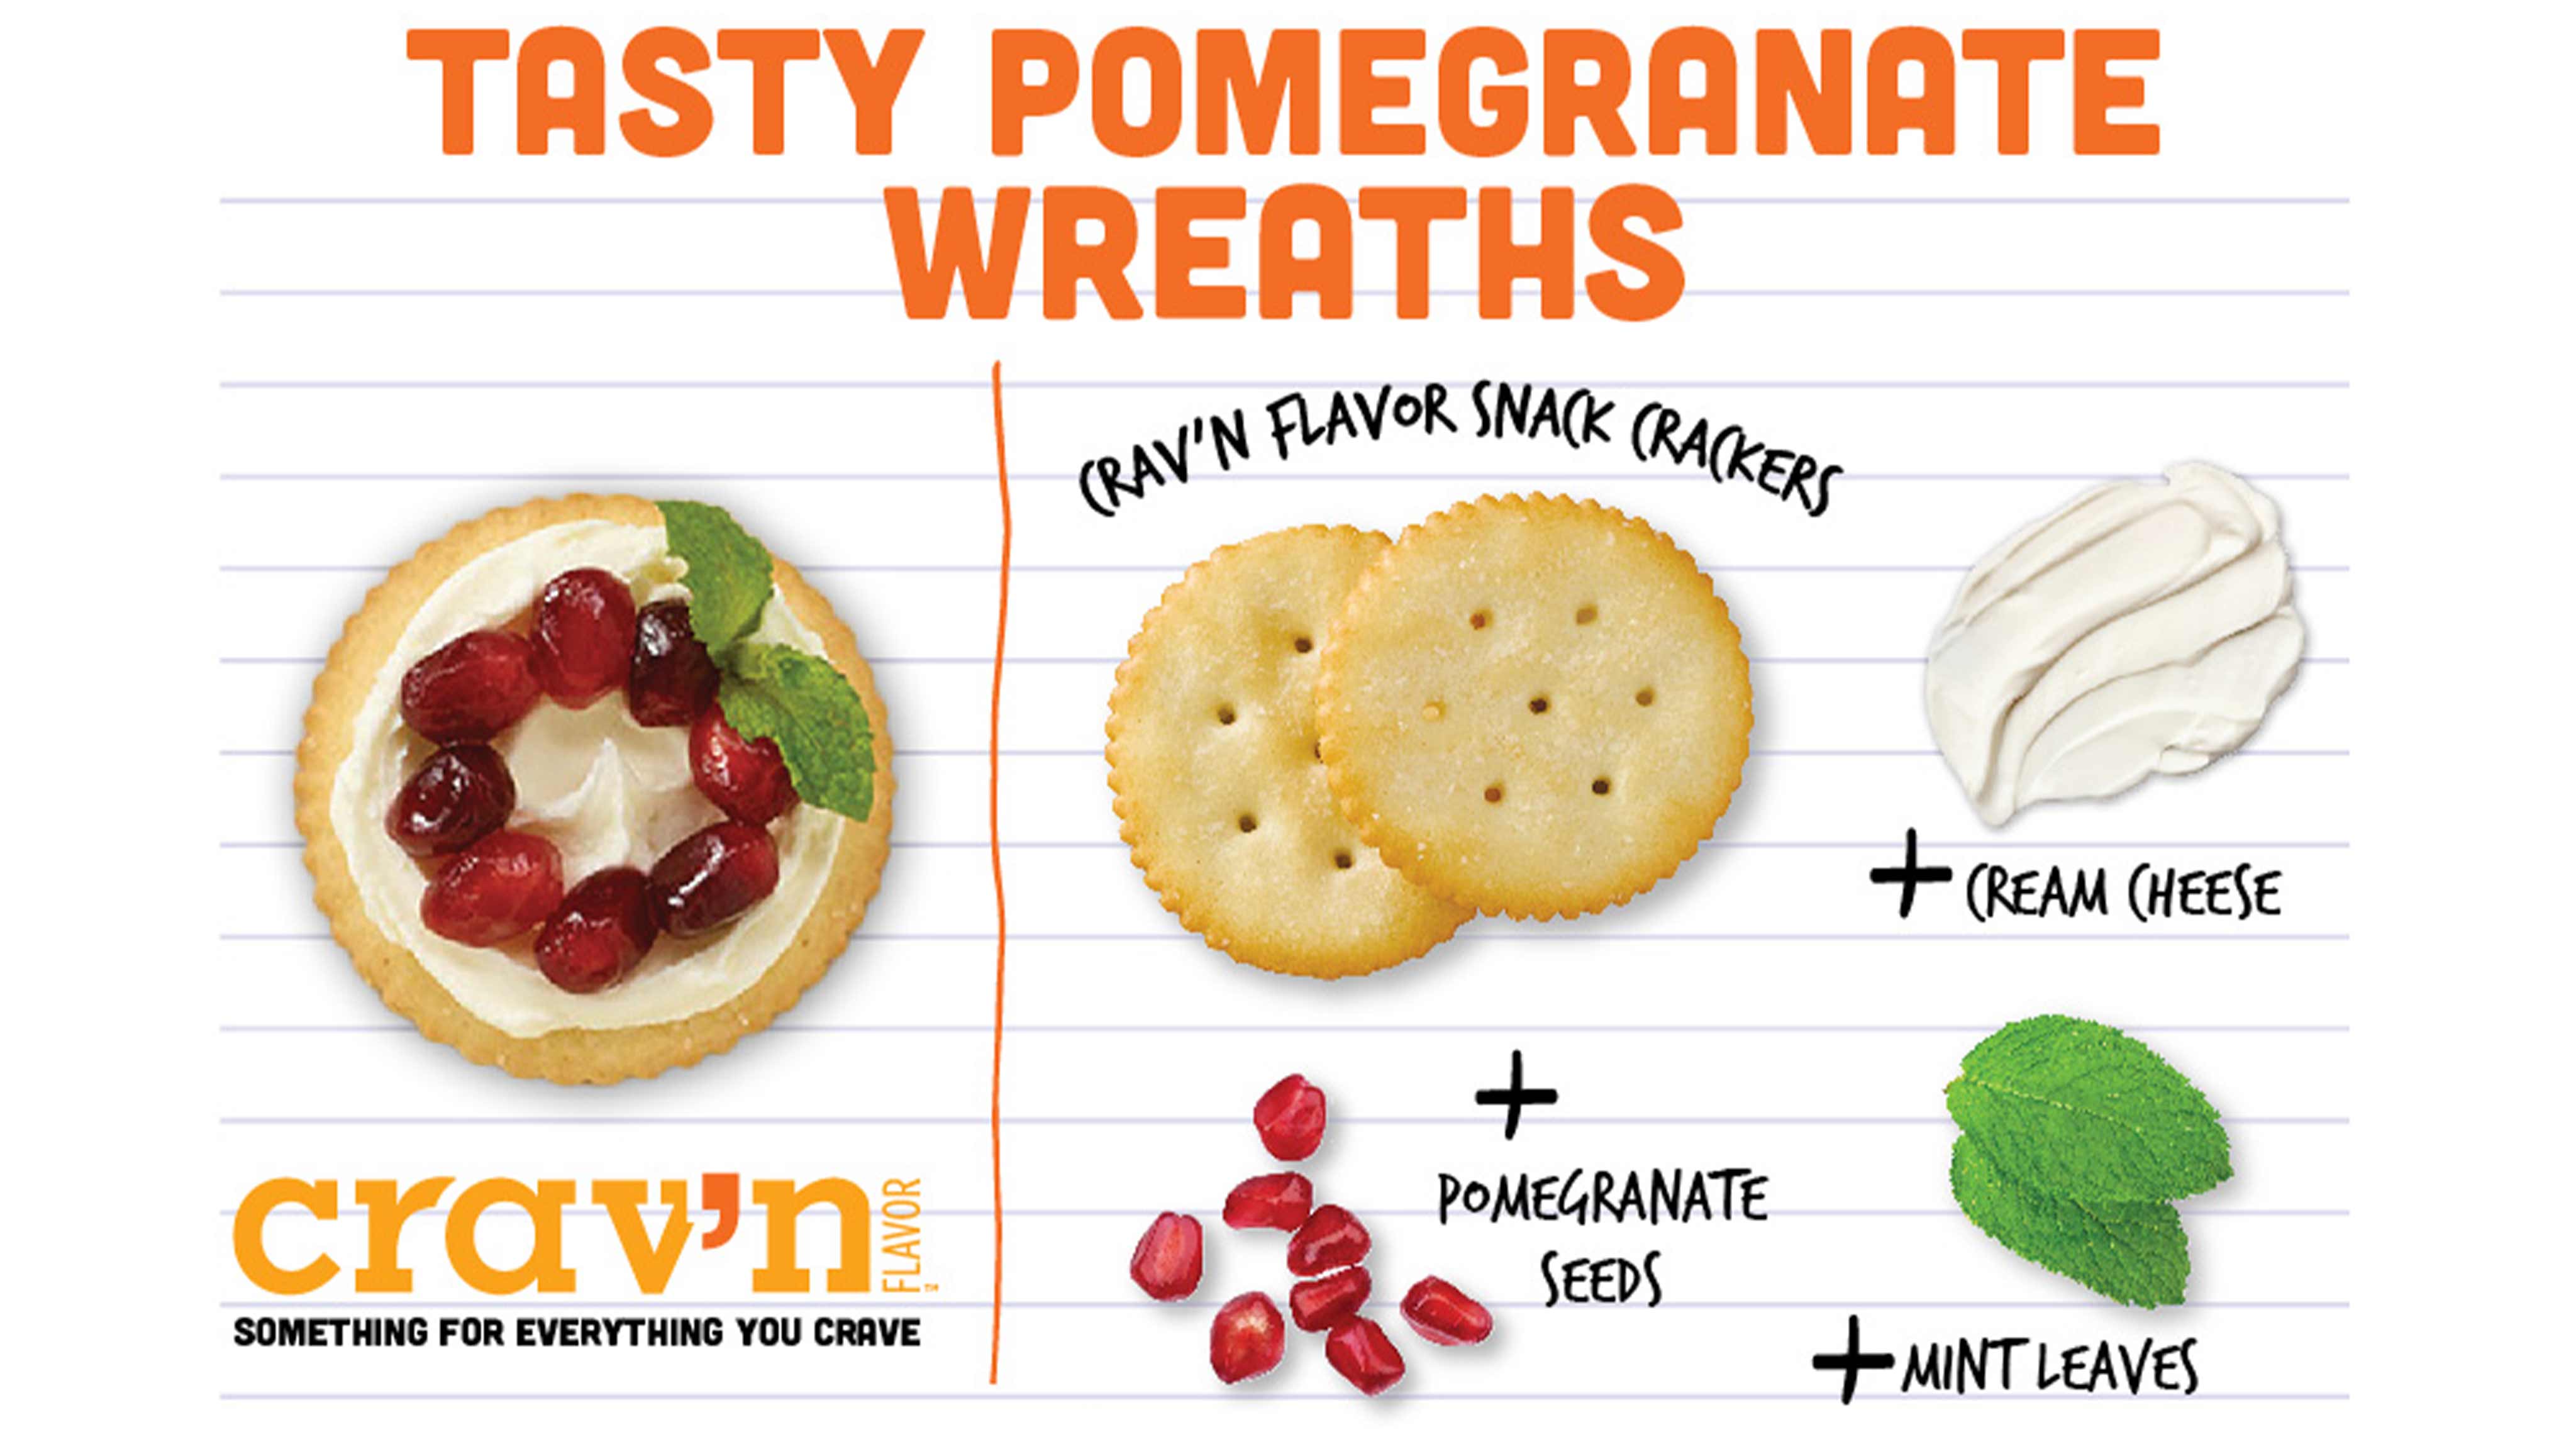 Image for Recipe Tasty Pomegranate Wreaths